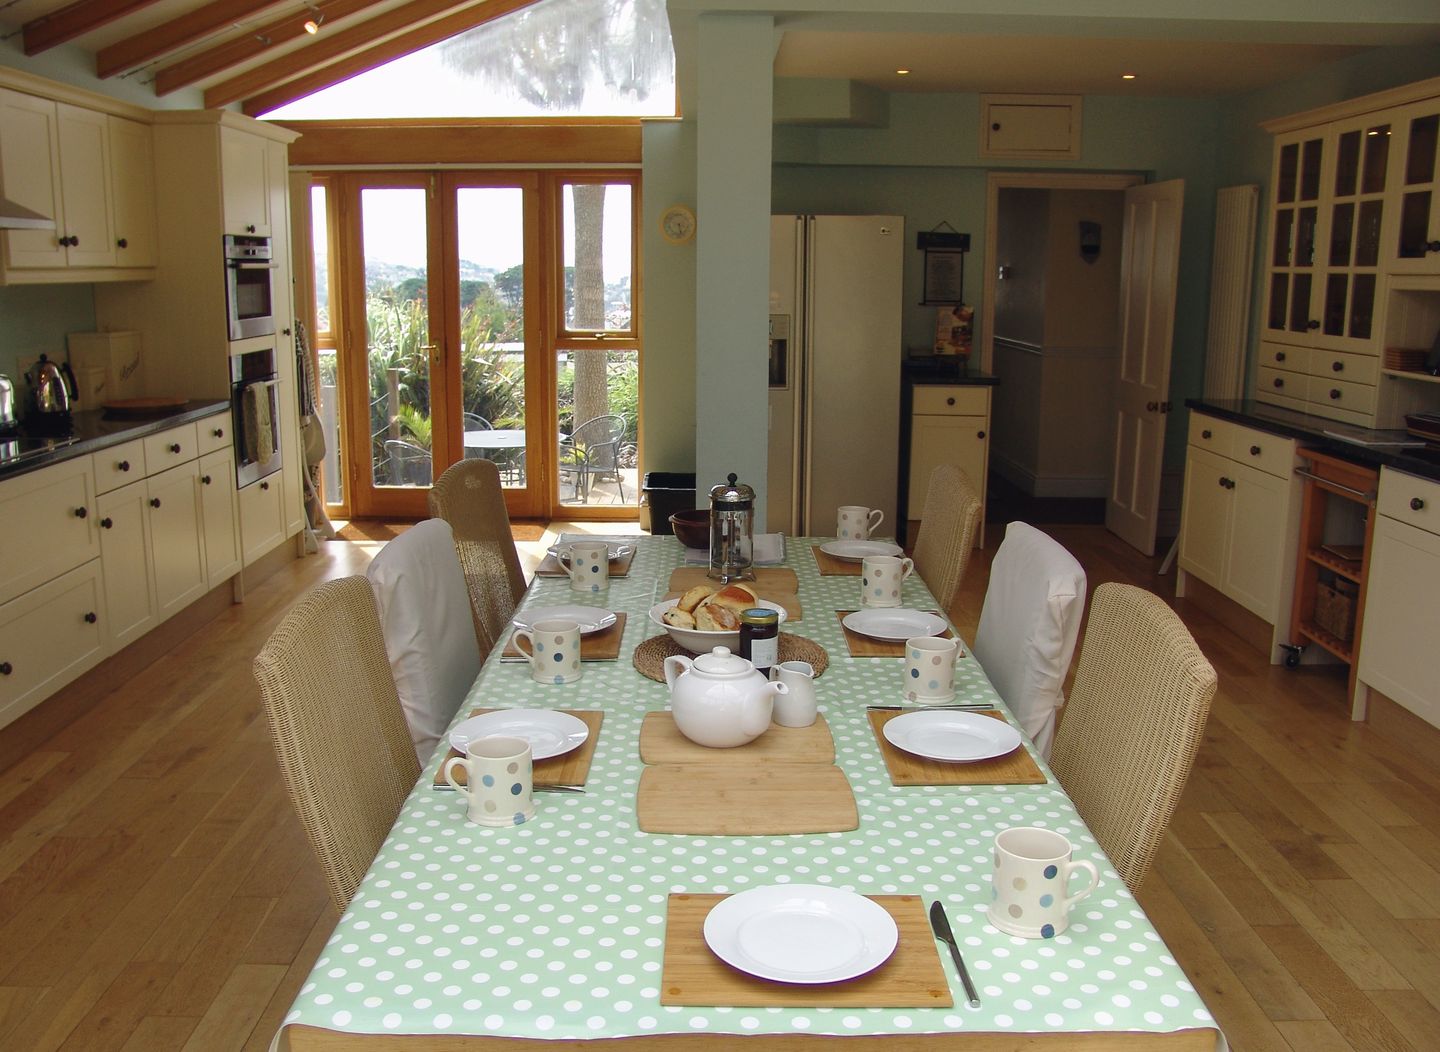 7 Park Road Fowey Dining Room Table